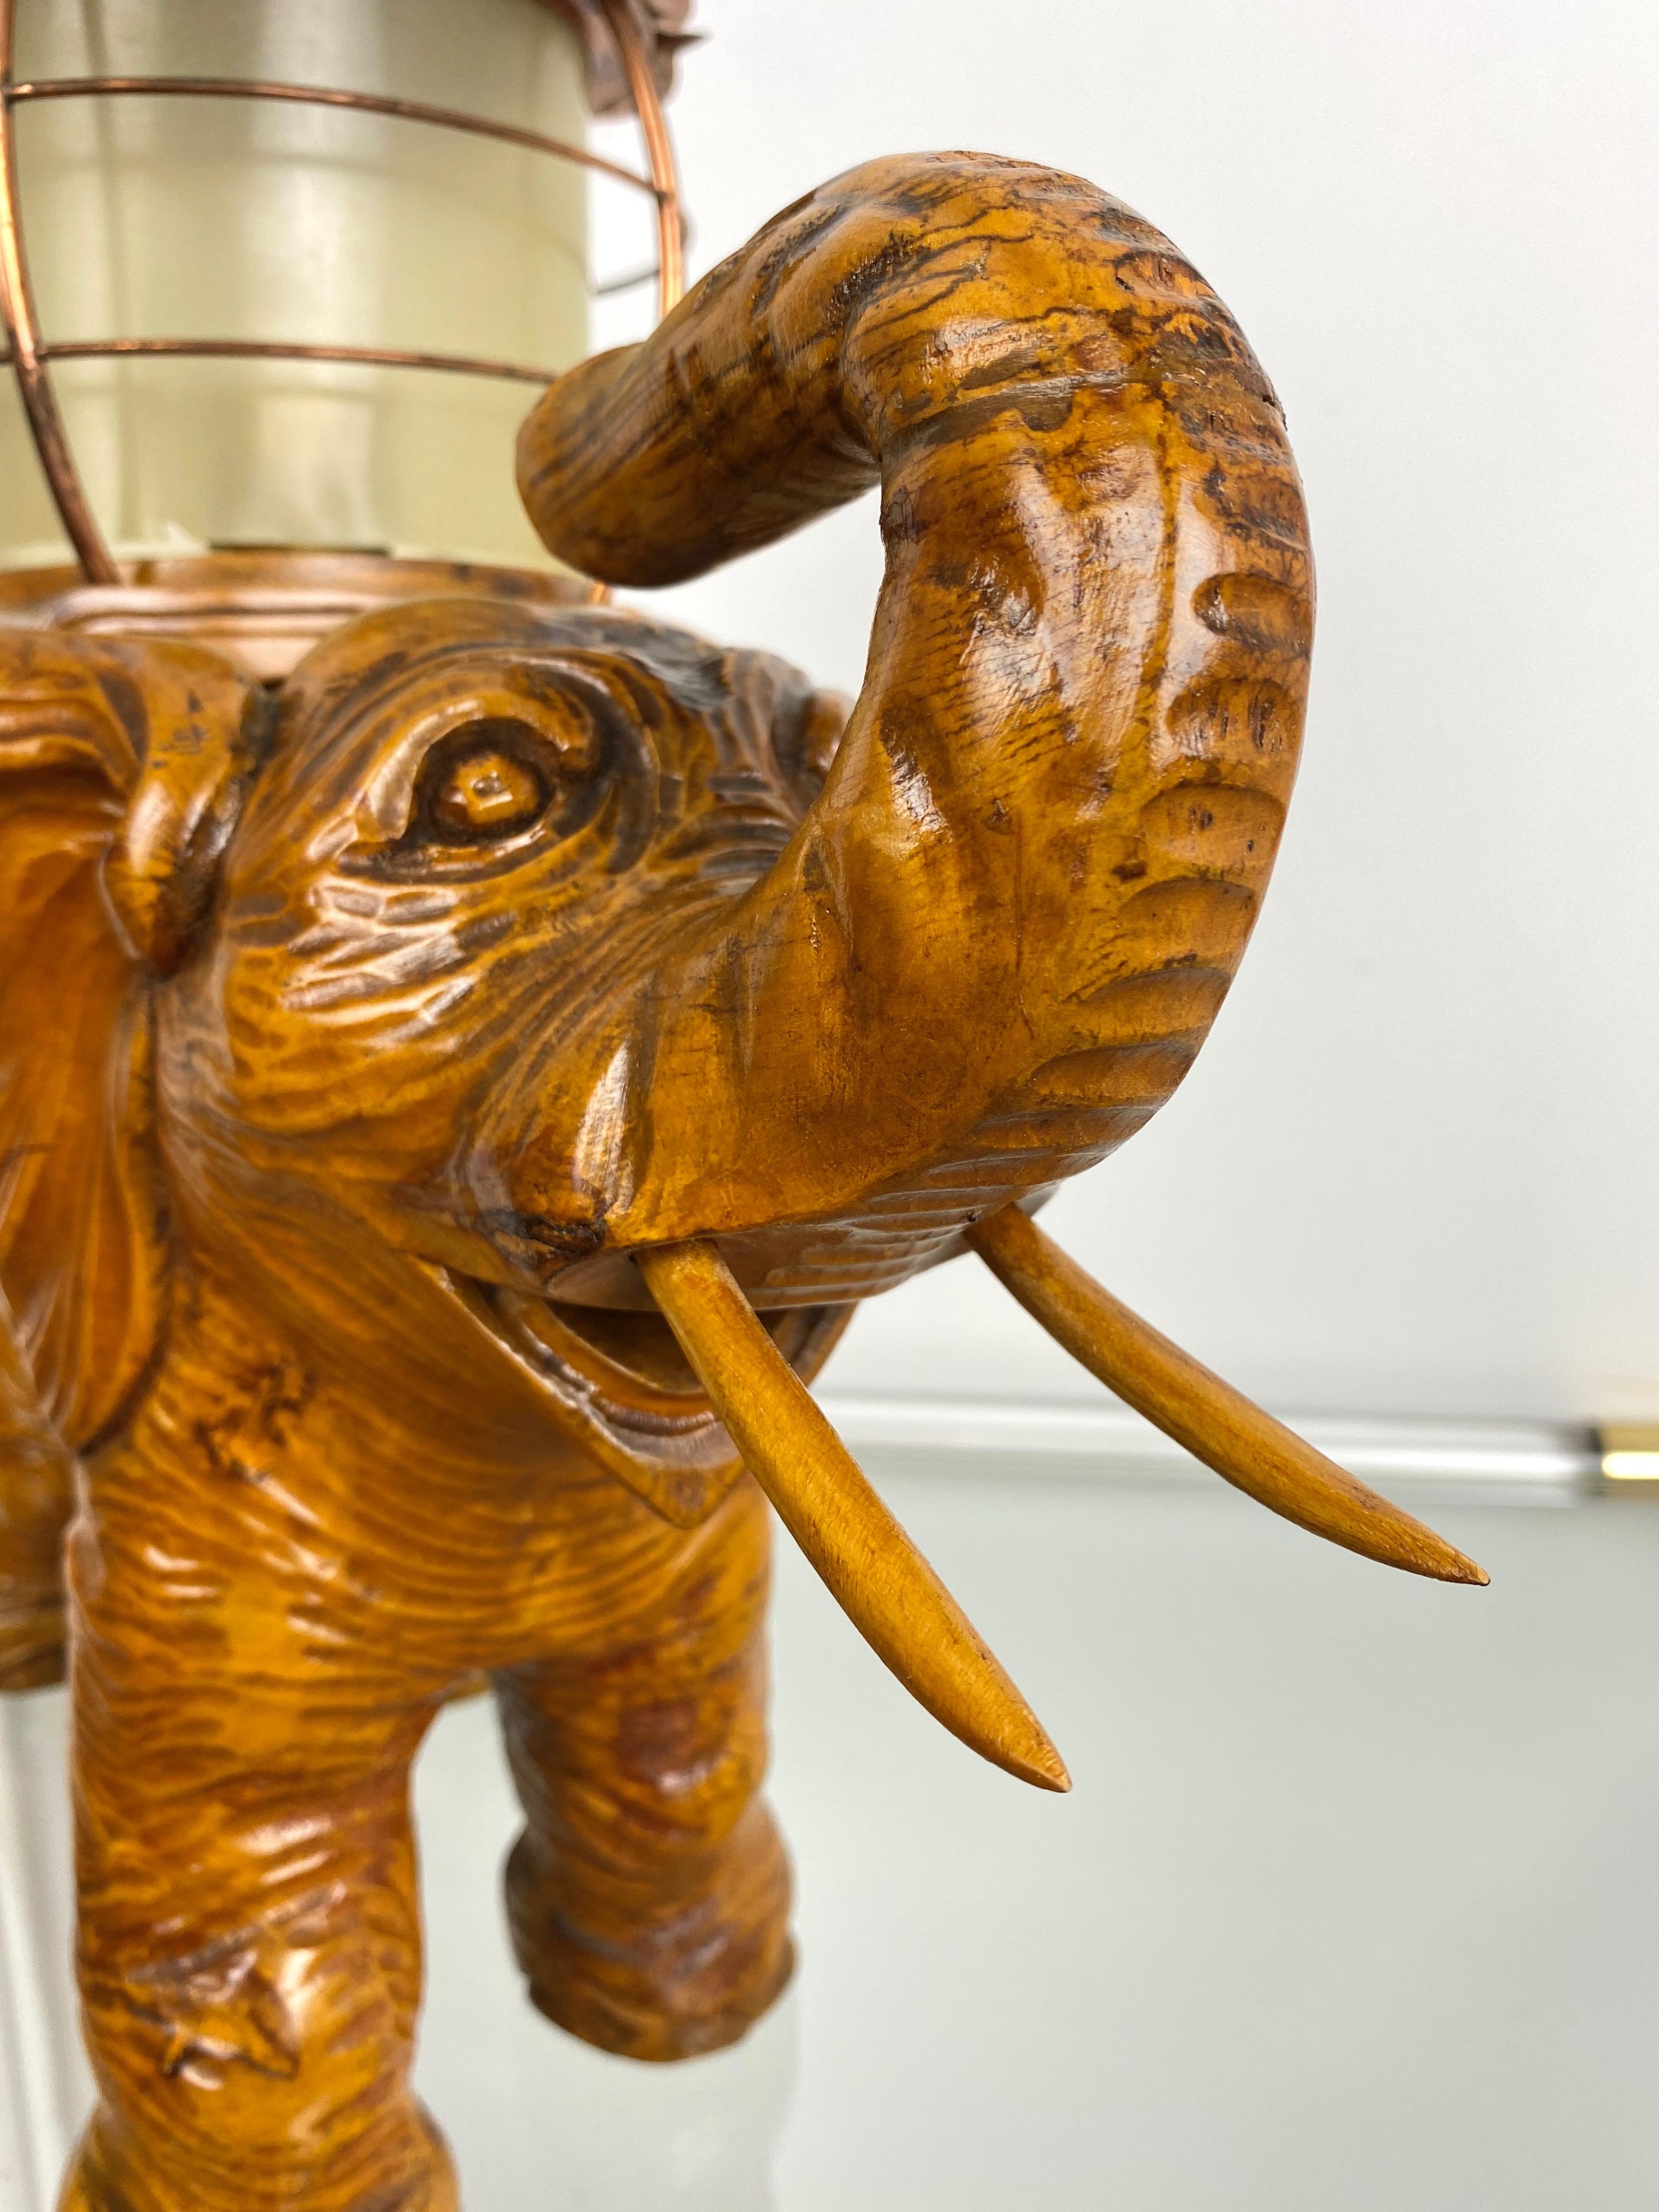 Mid-20th Century Elephant Table Lamp Hand Carved Wood and Copper Aldo Tura for Macabo Italy 1950s For Sale